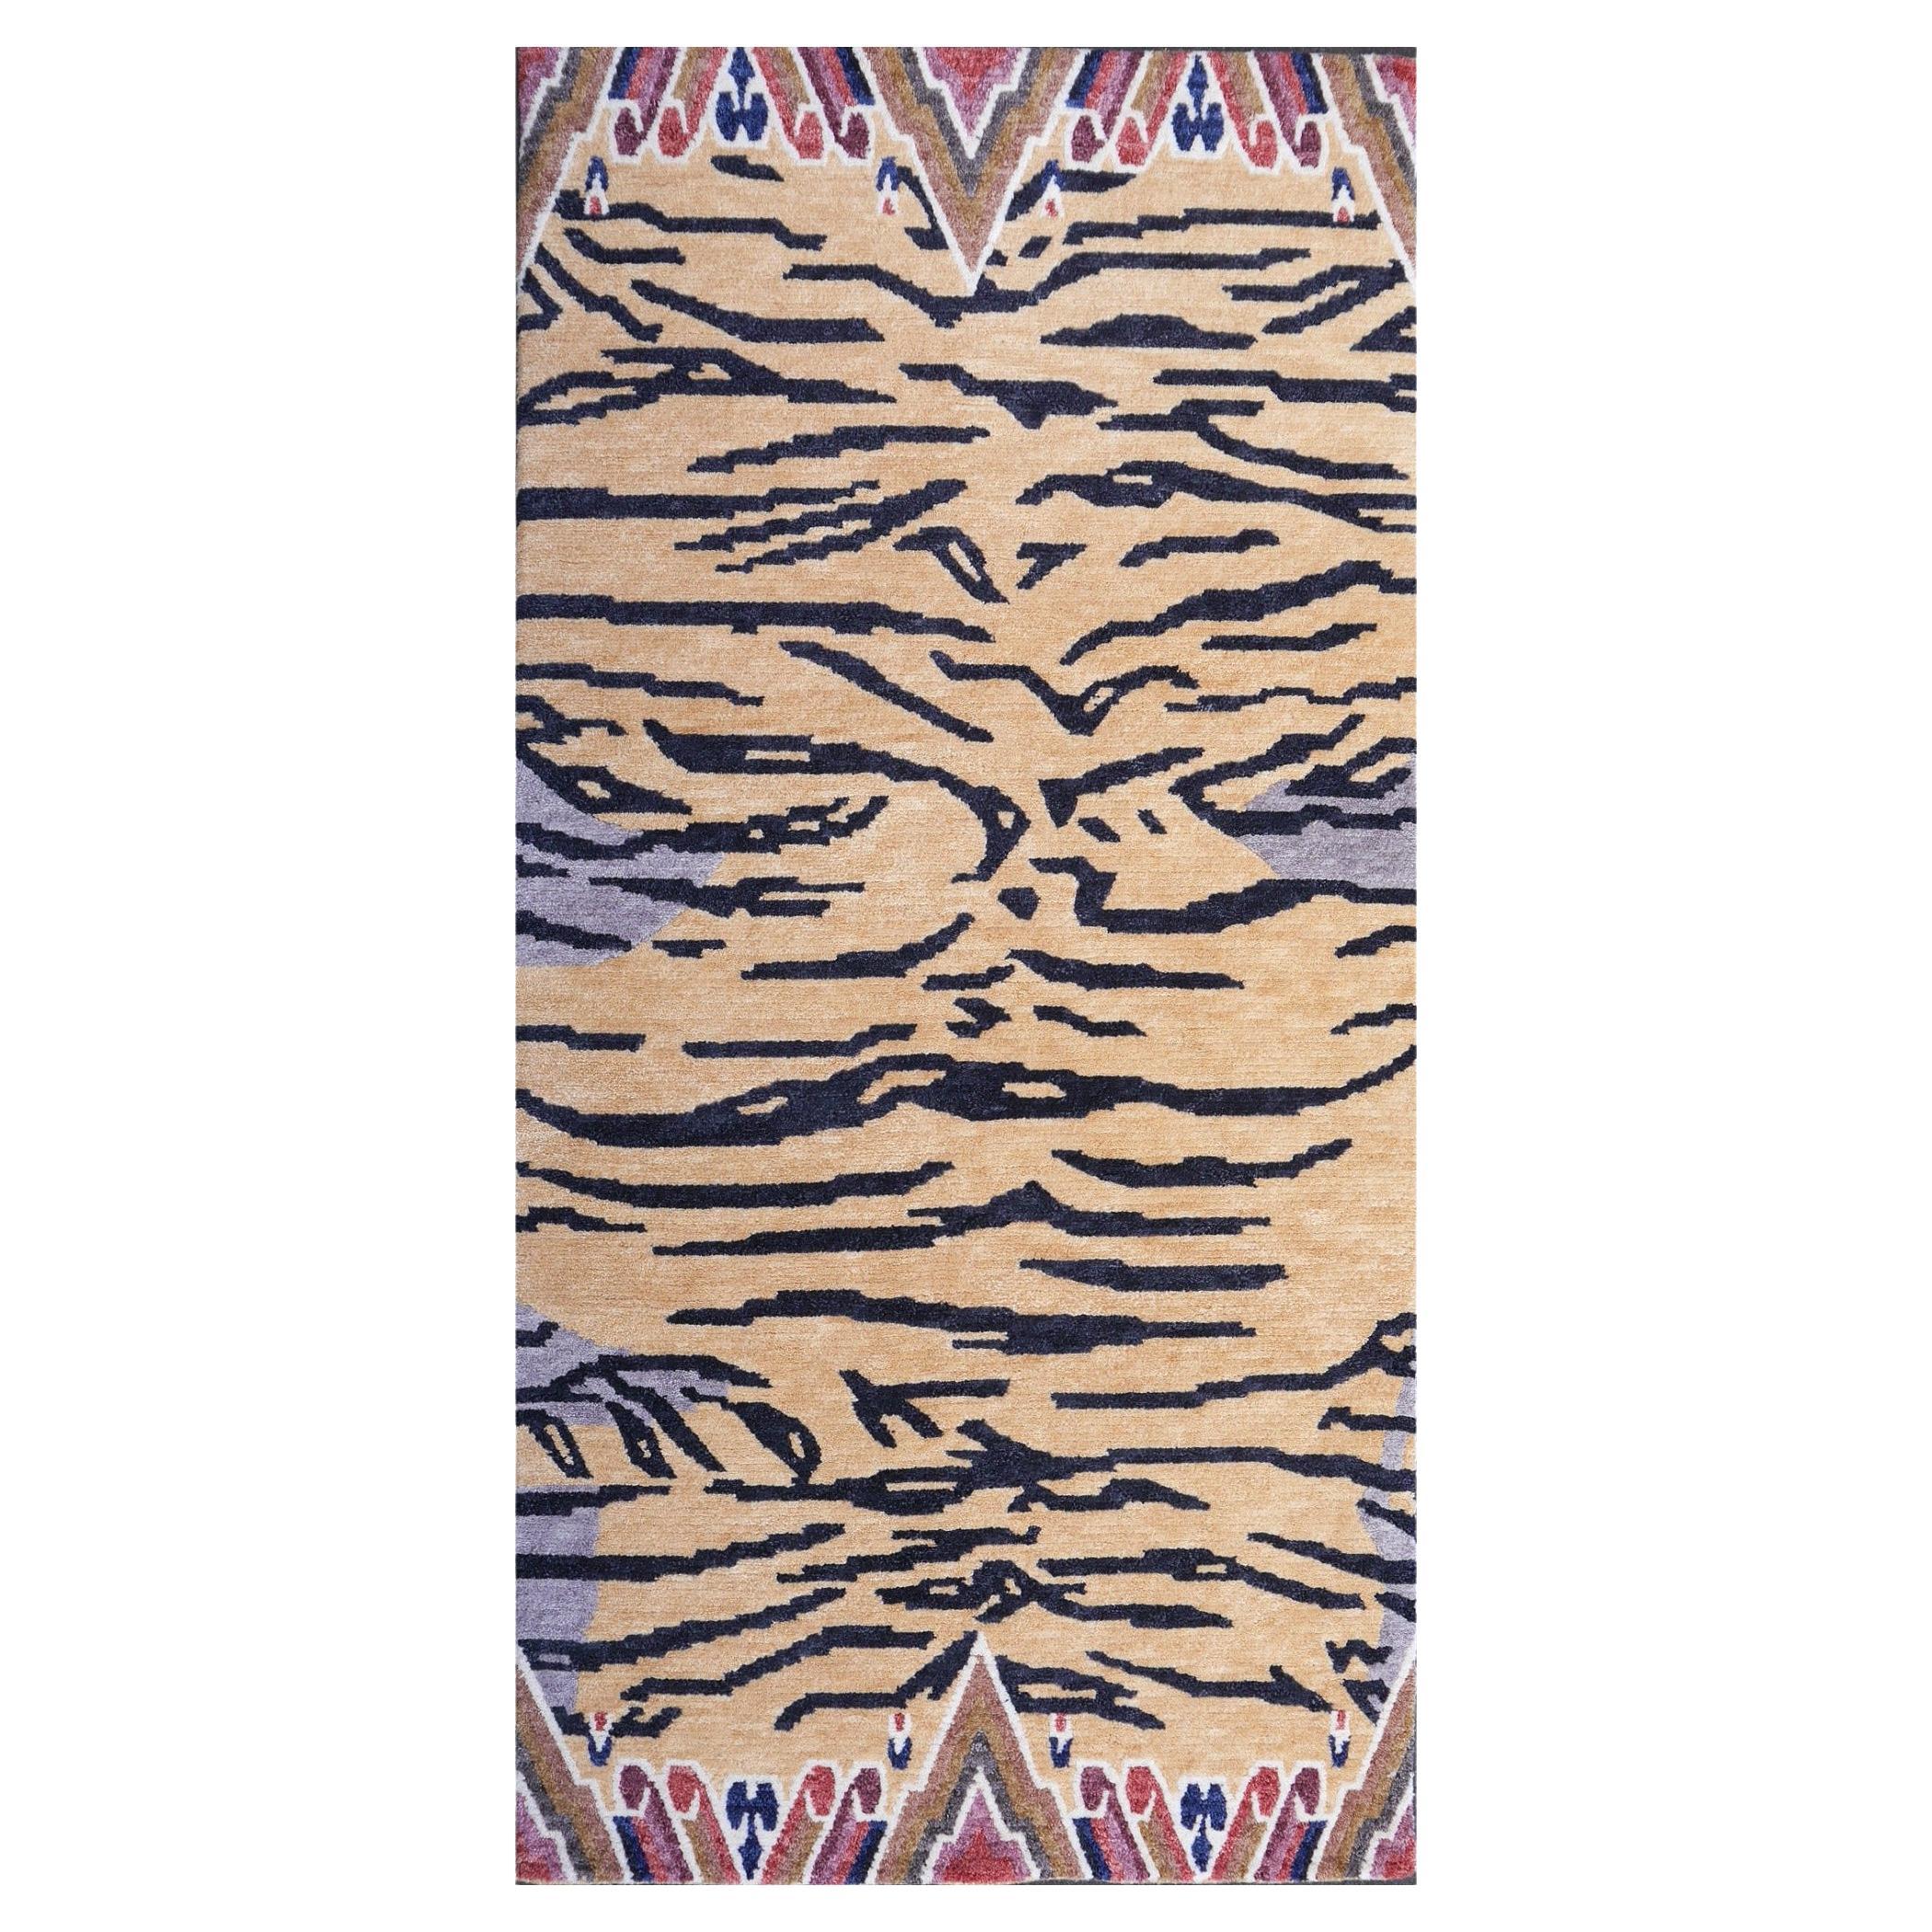 Tibetan Tiger Rug Pure Wool Hand Knotted by Djoharian Collection Antique Design For Sale